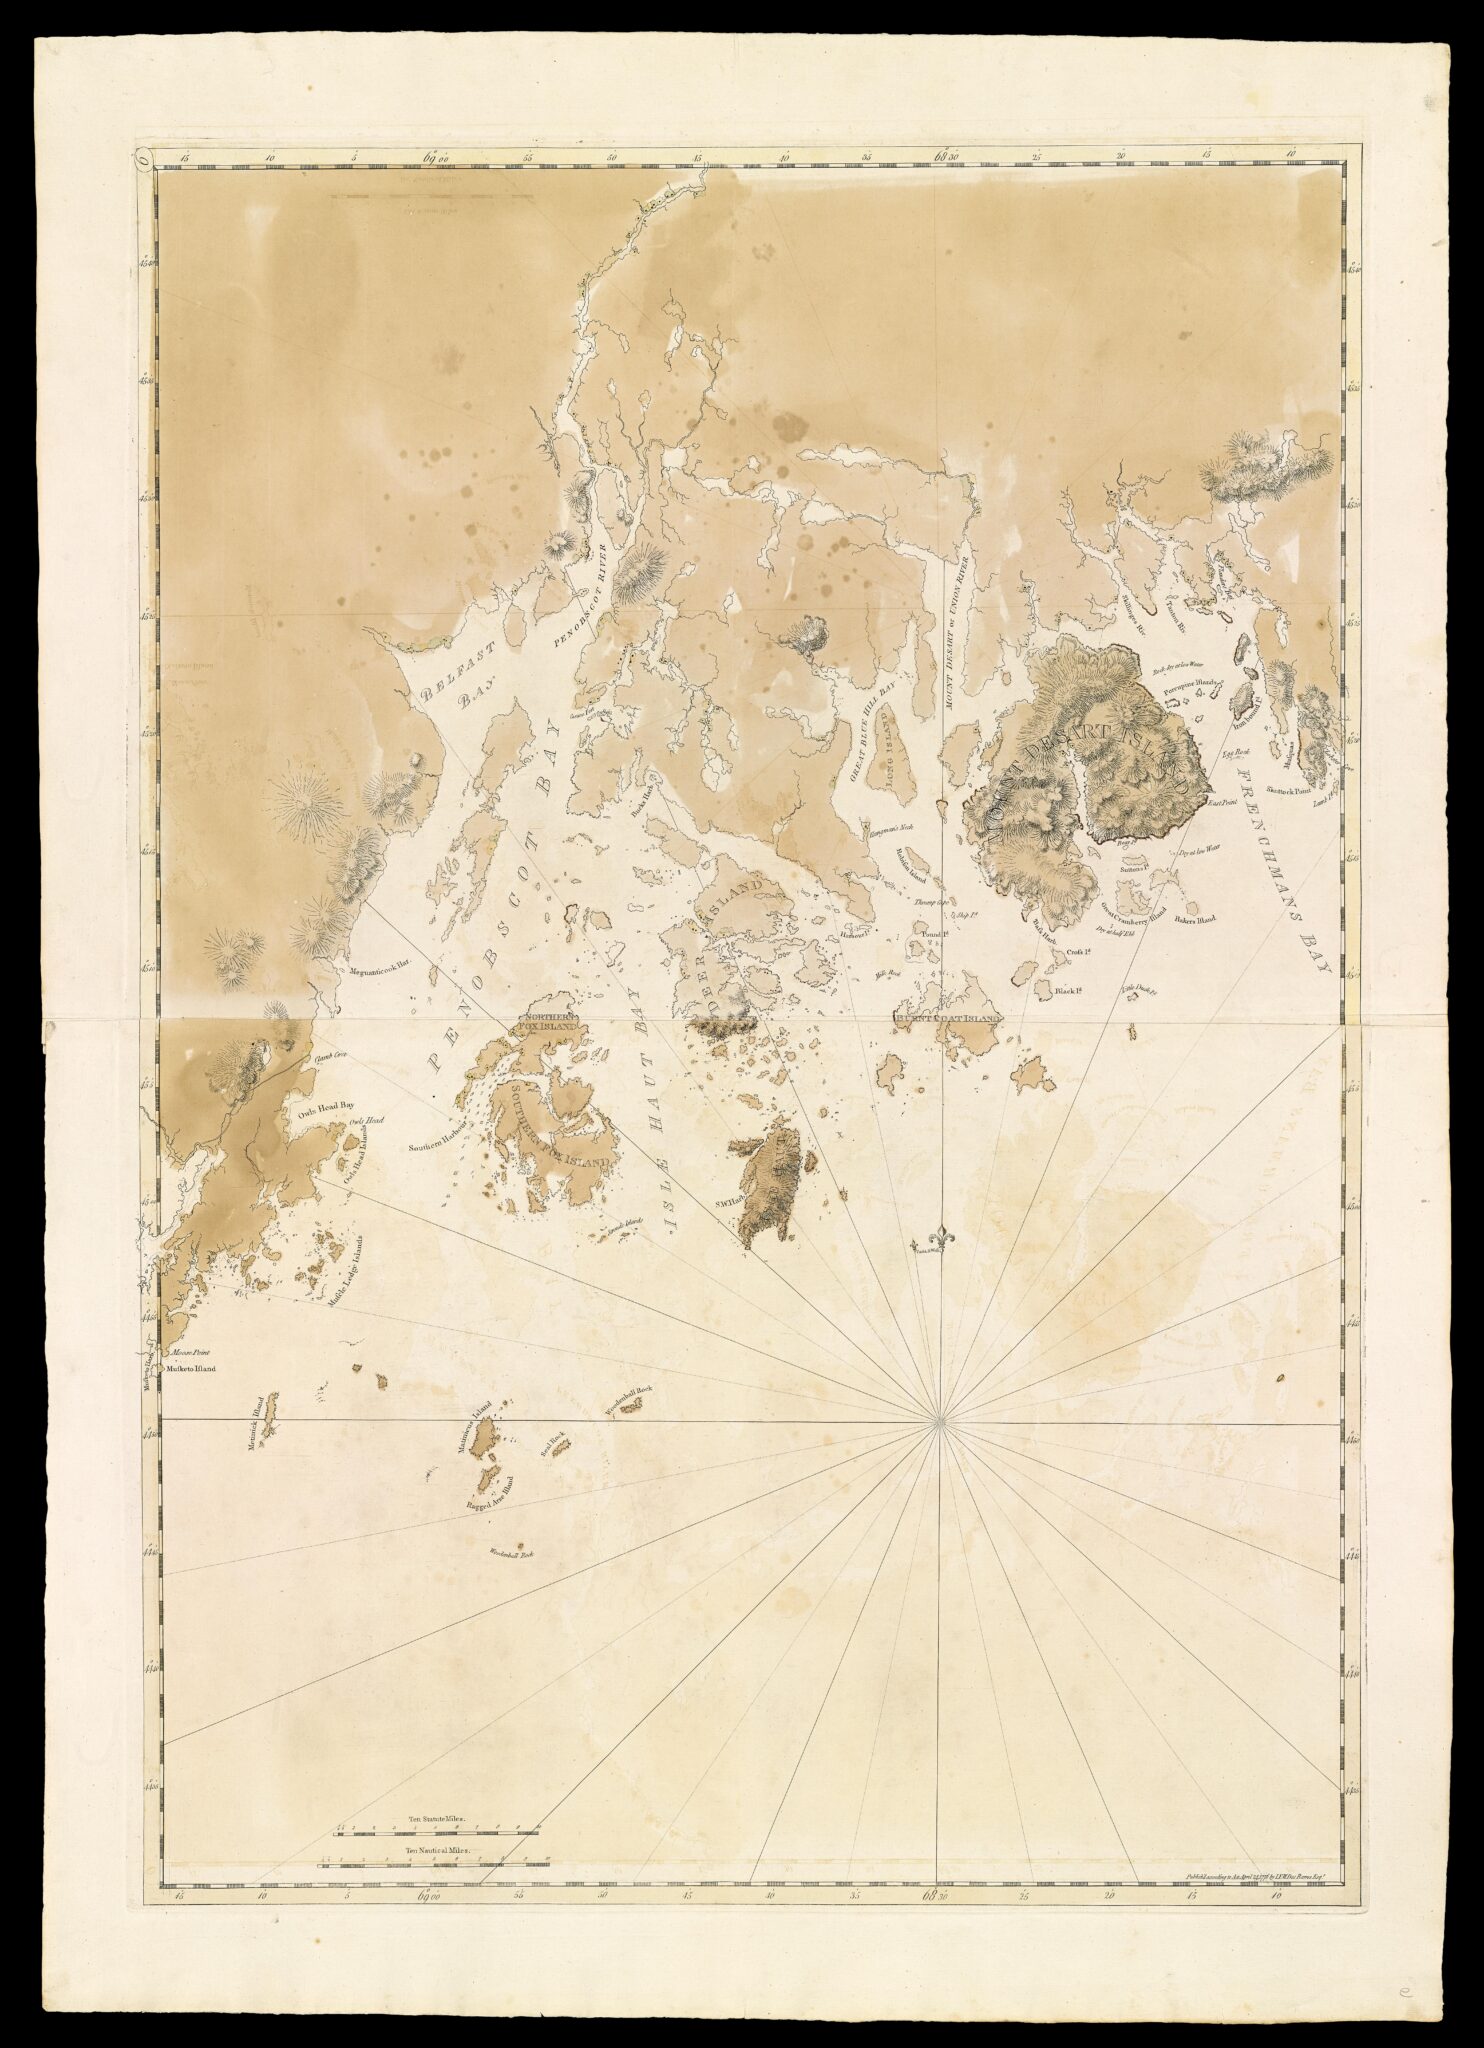 Coast of Maine- From Frenchman's Bay to Musketo Island including Mount Desart and Deer Islands, and Penobscot Bay, 1777. Historic map, image courtesy of the Osher Map Library and Smith Center for Cartographic Education, University of Southern Maine.